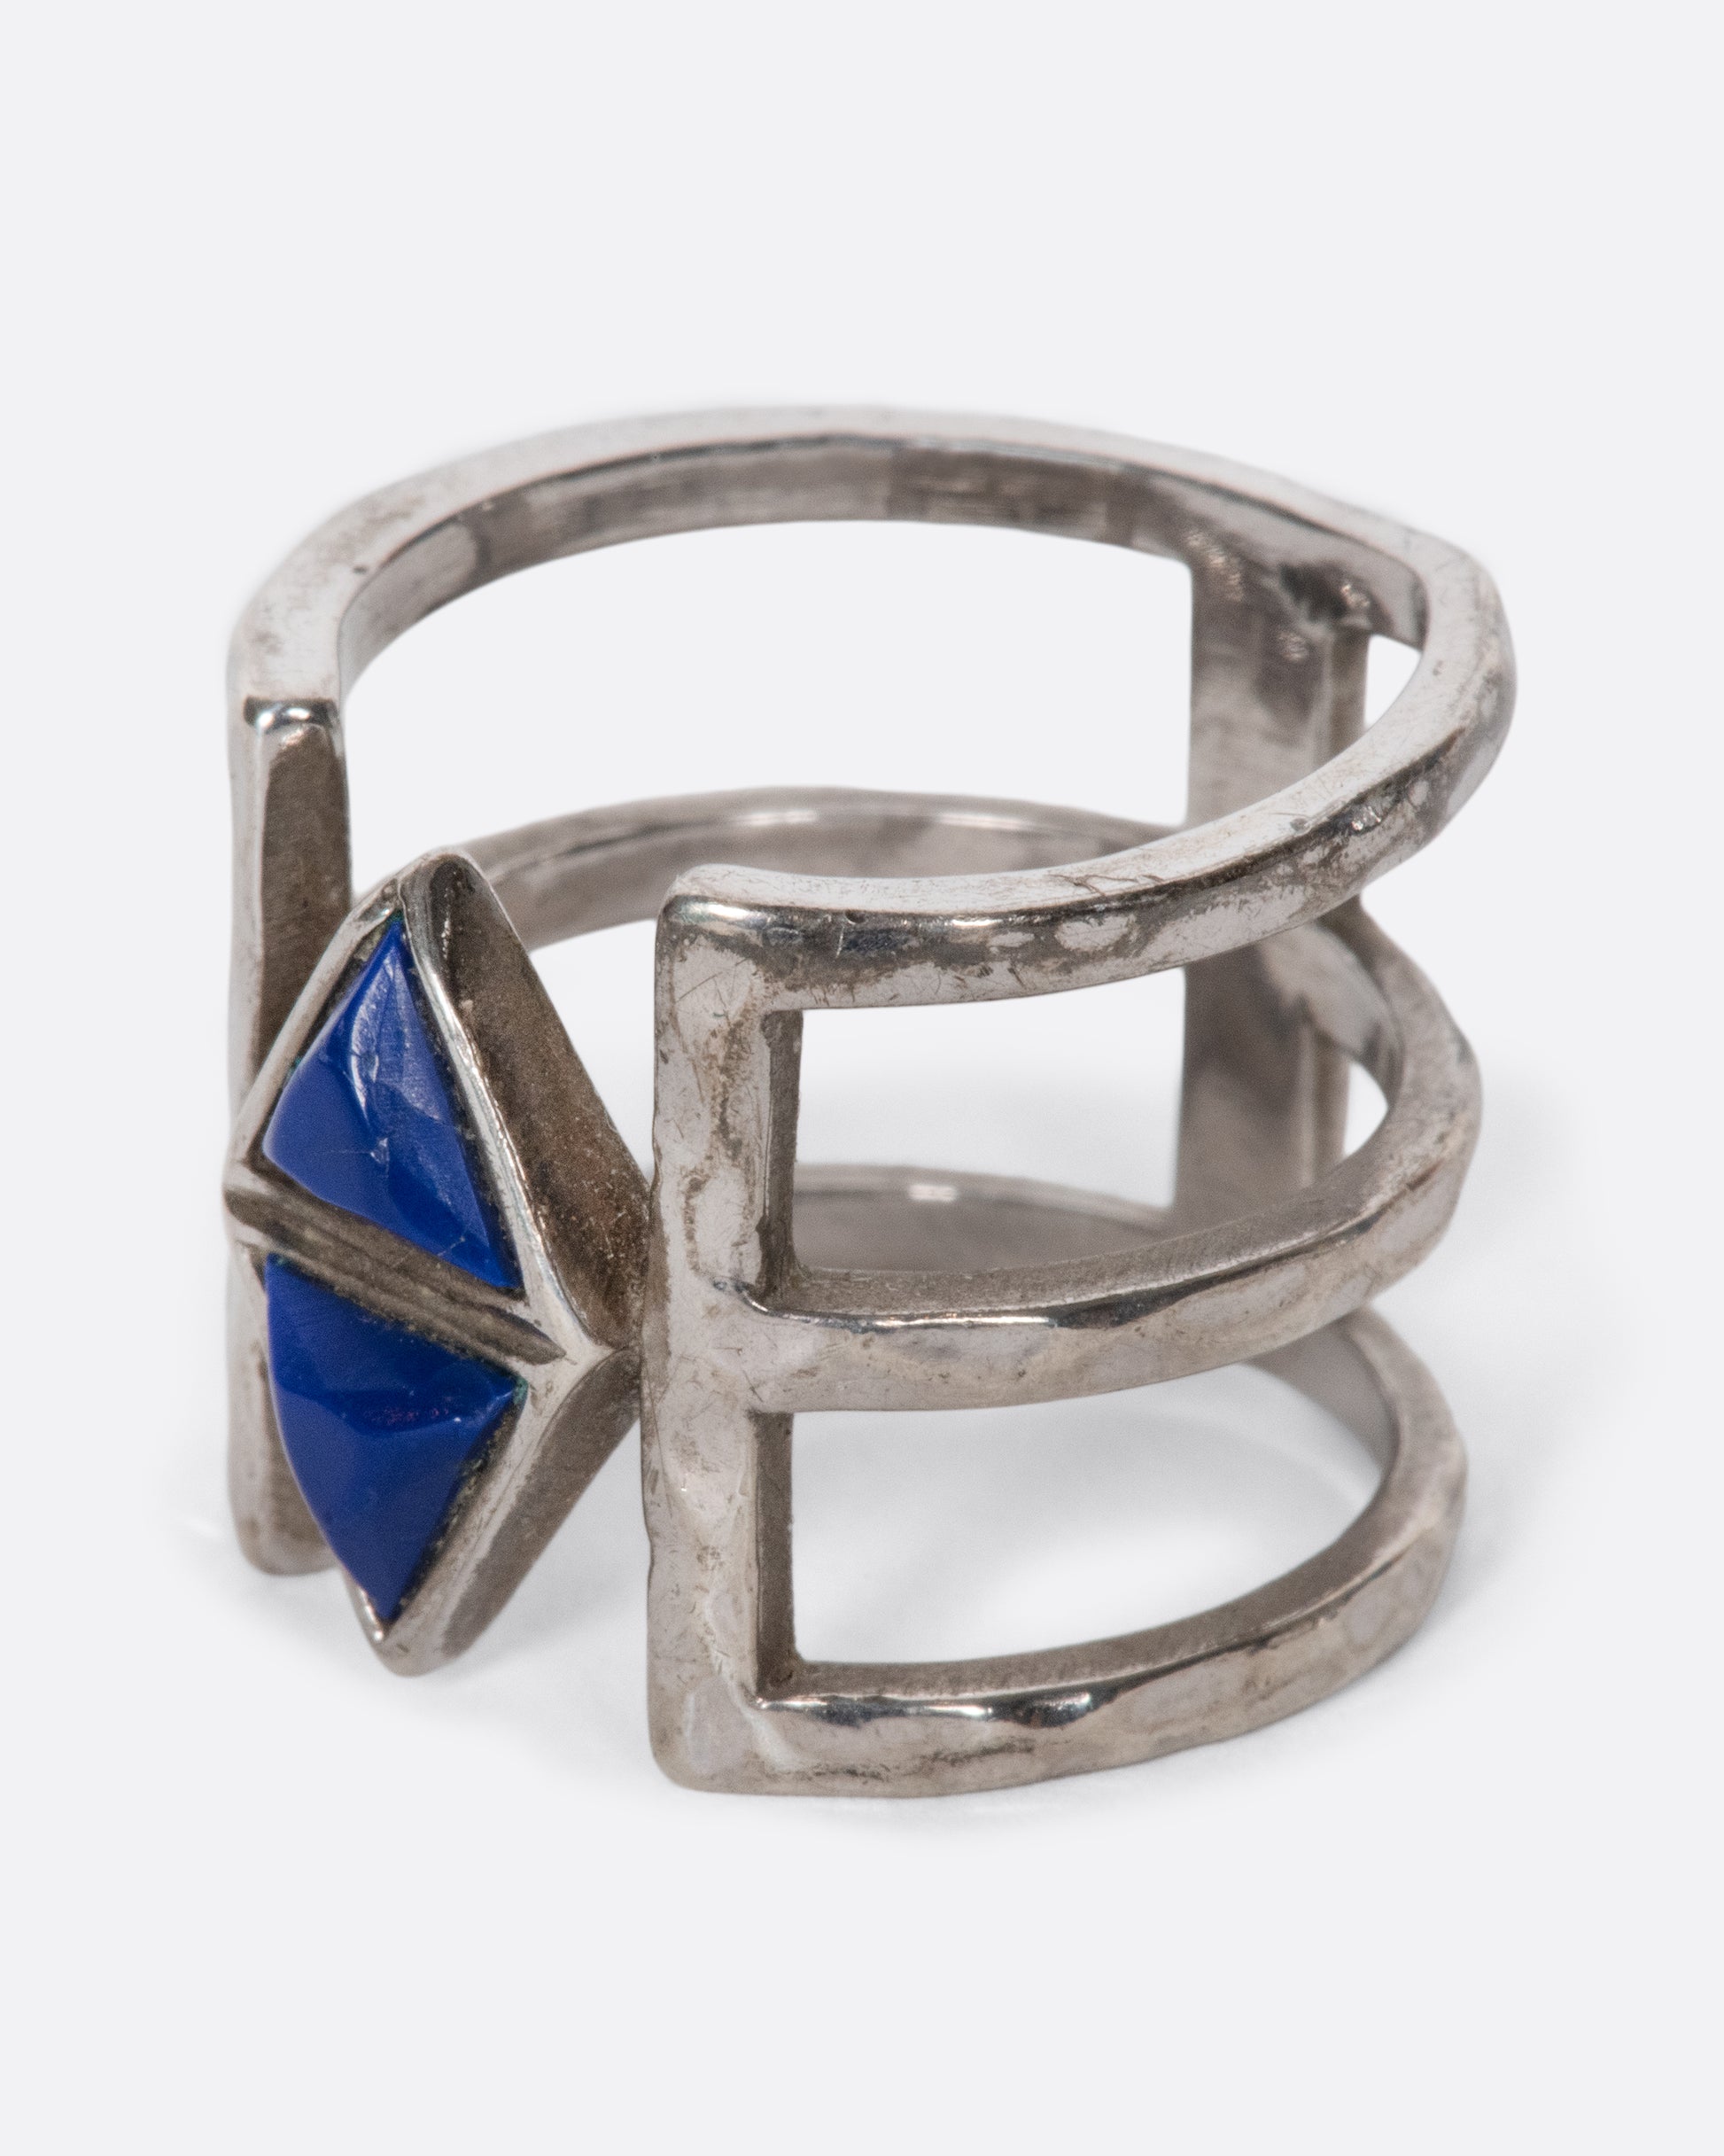 This triple-banded sterling silver vintage ring is centered around a pair of dreamy lapis triangles. Negative space between the bands gives the illusion that the lapis is effortlessly floating. This piece takes up a lot of space on your finger, creating an elongating effect.